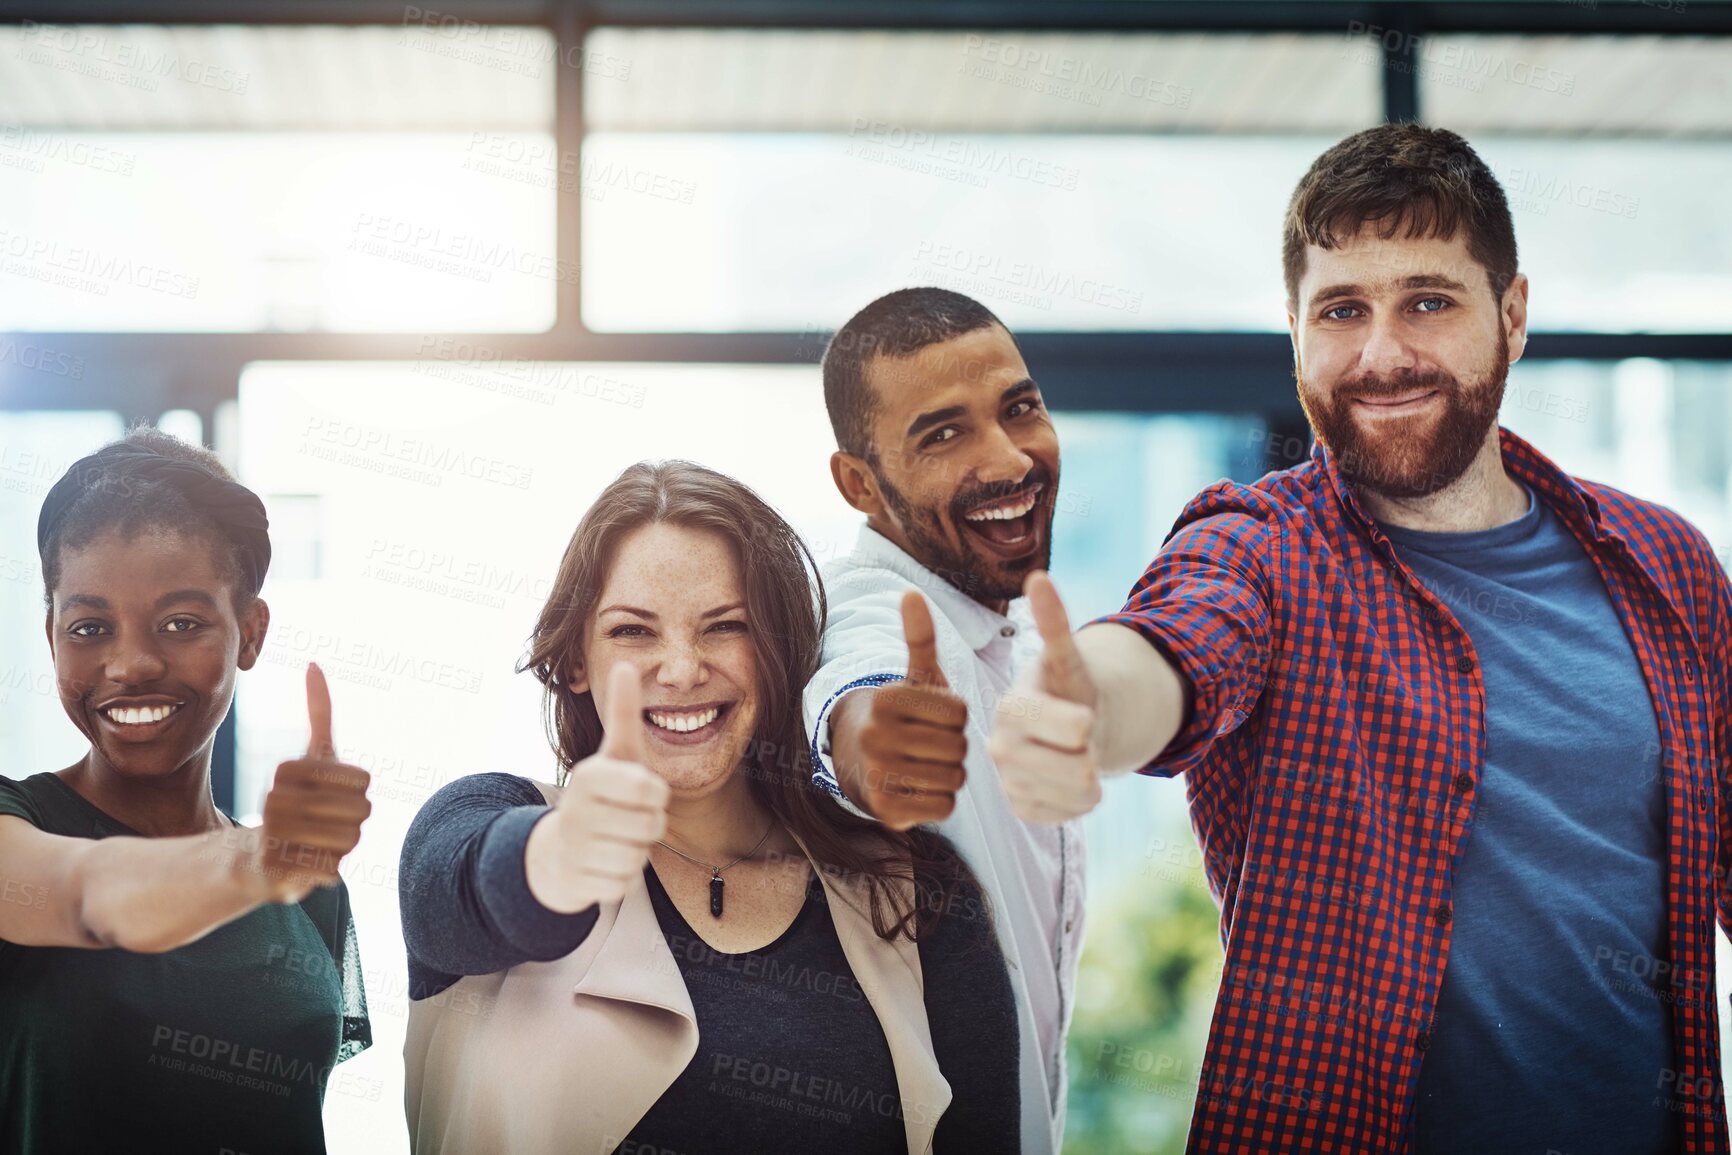 Buy stock photo Teamwork, support and trust with a thumbs up from happy colleagues collaborating. Excited partners uniting, showing trust and success with a winning gesture. Community working together towards a goal